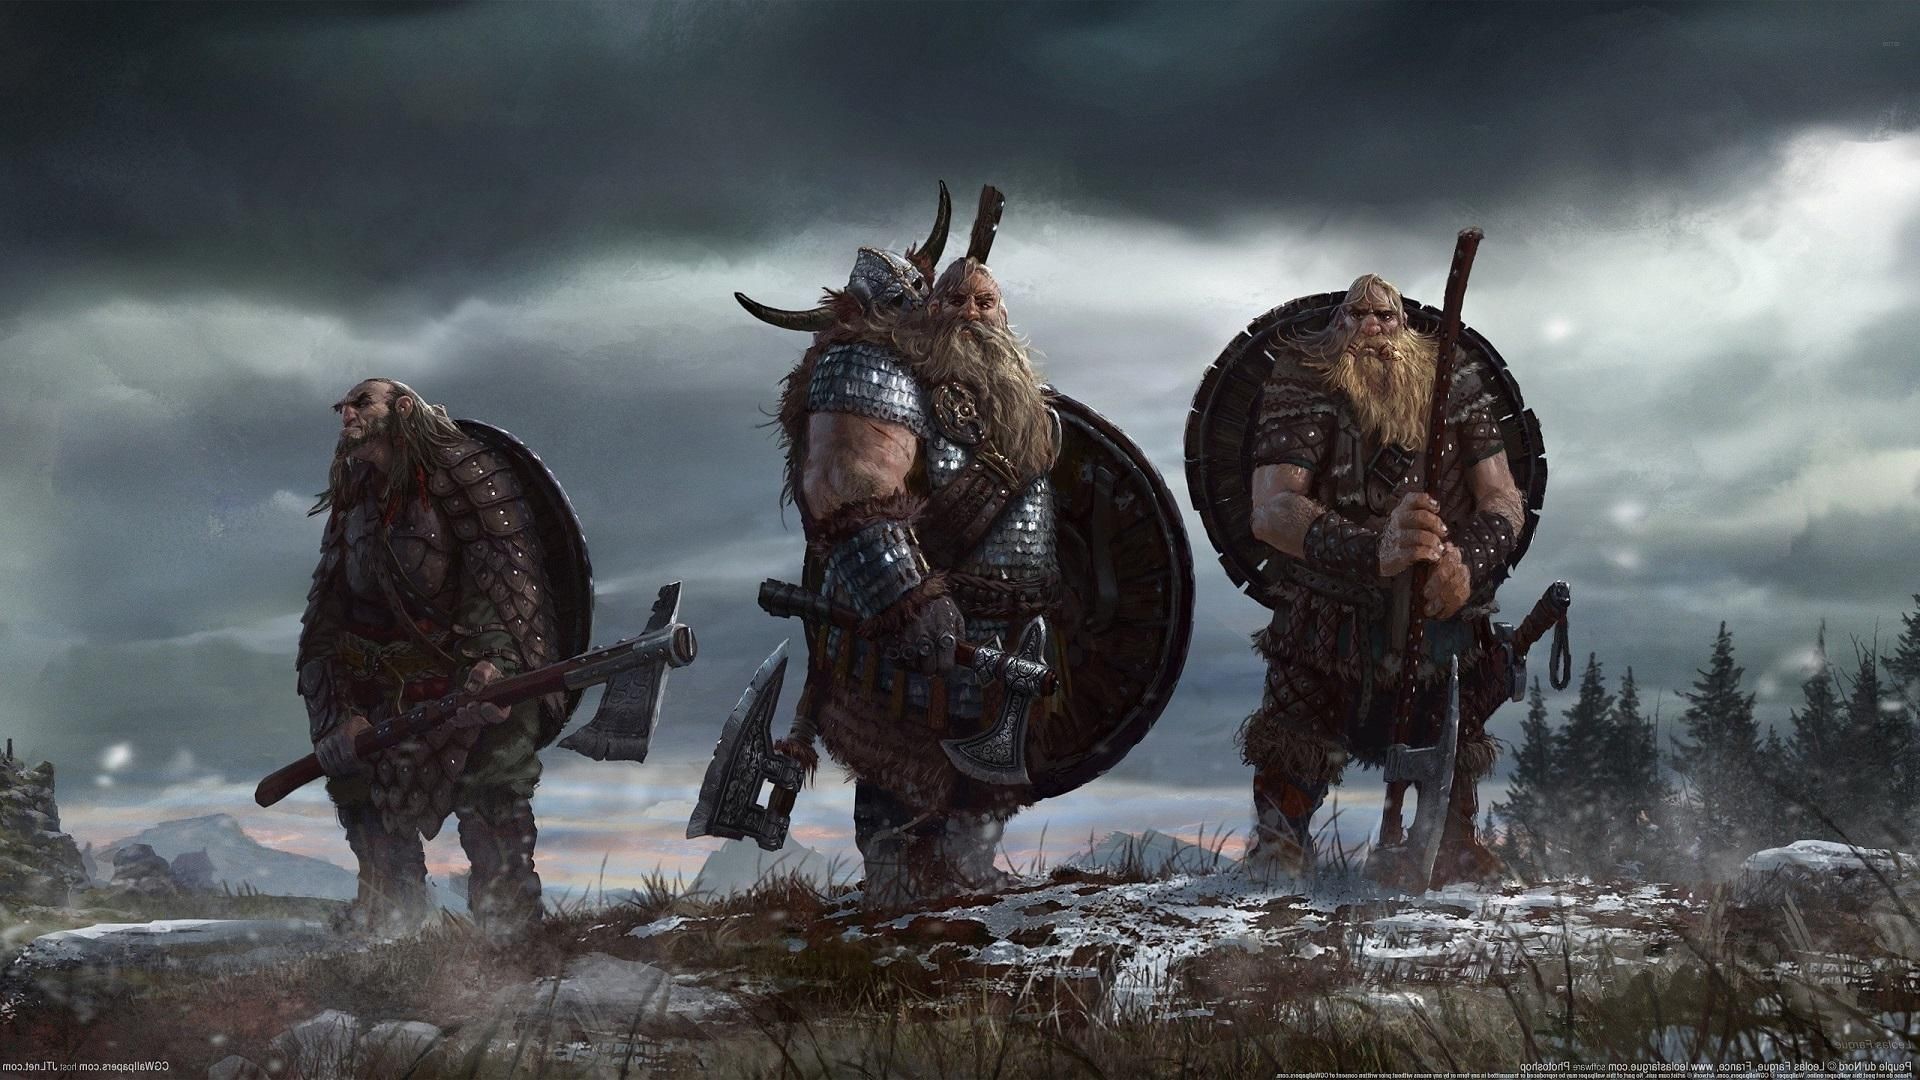 Vikings Wallpaper for Computer (74+ images)